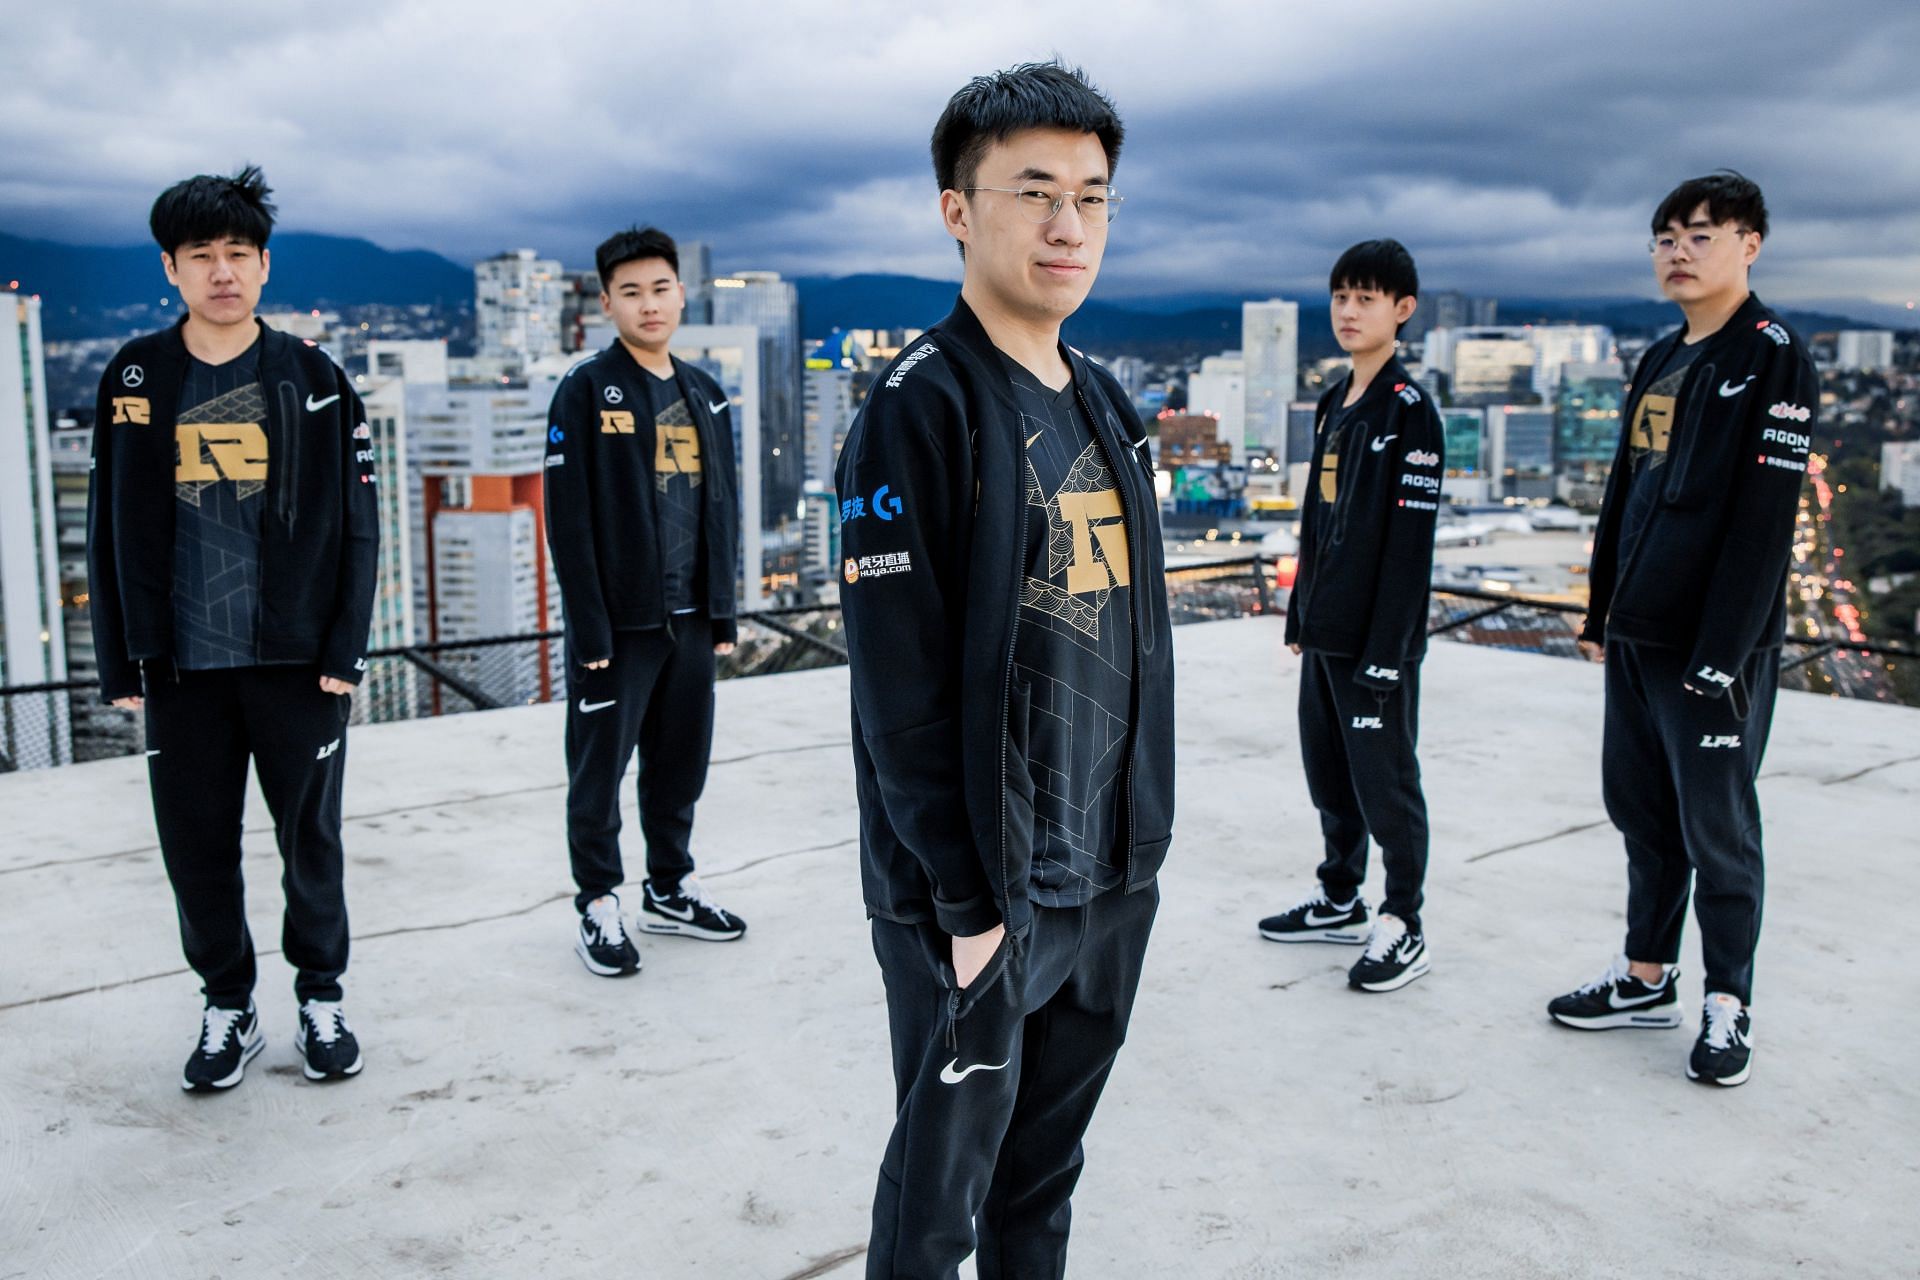 RNG showcase class on day 2 of League of Legends Worlds 2022 (Image via Riot Games)